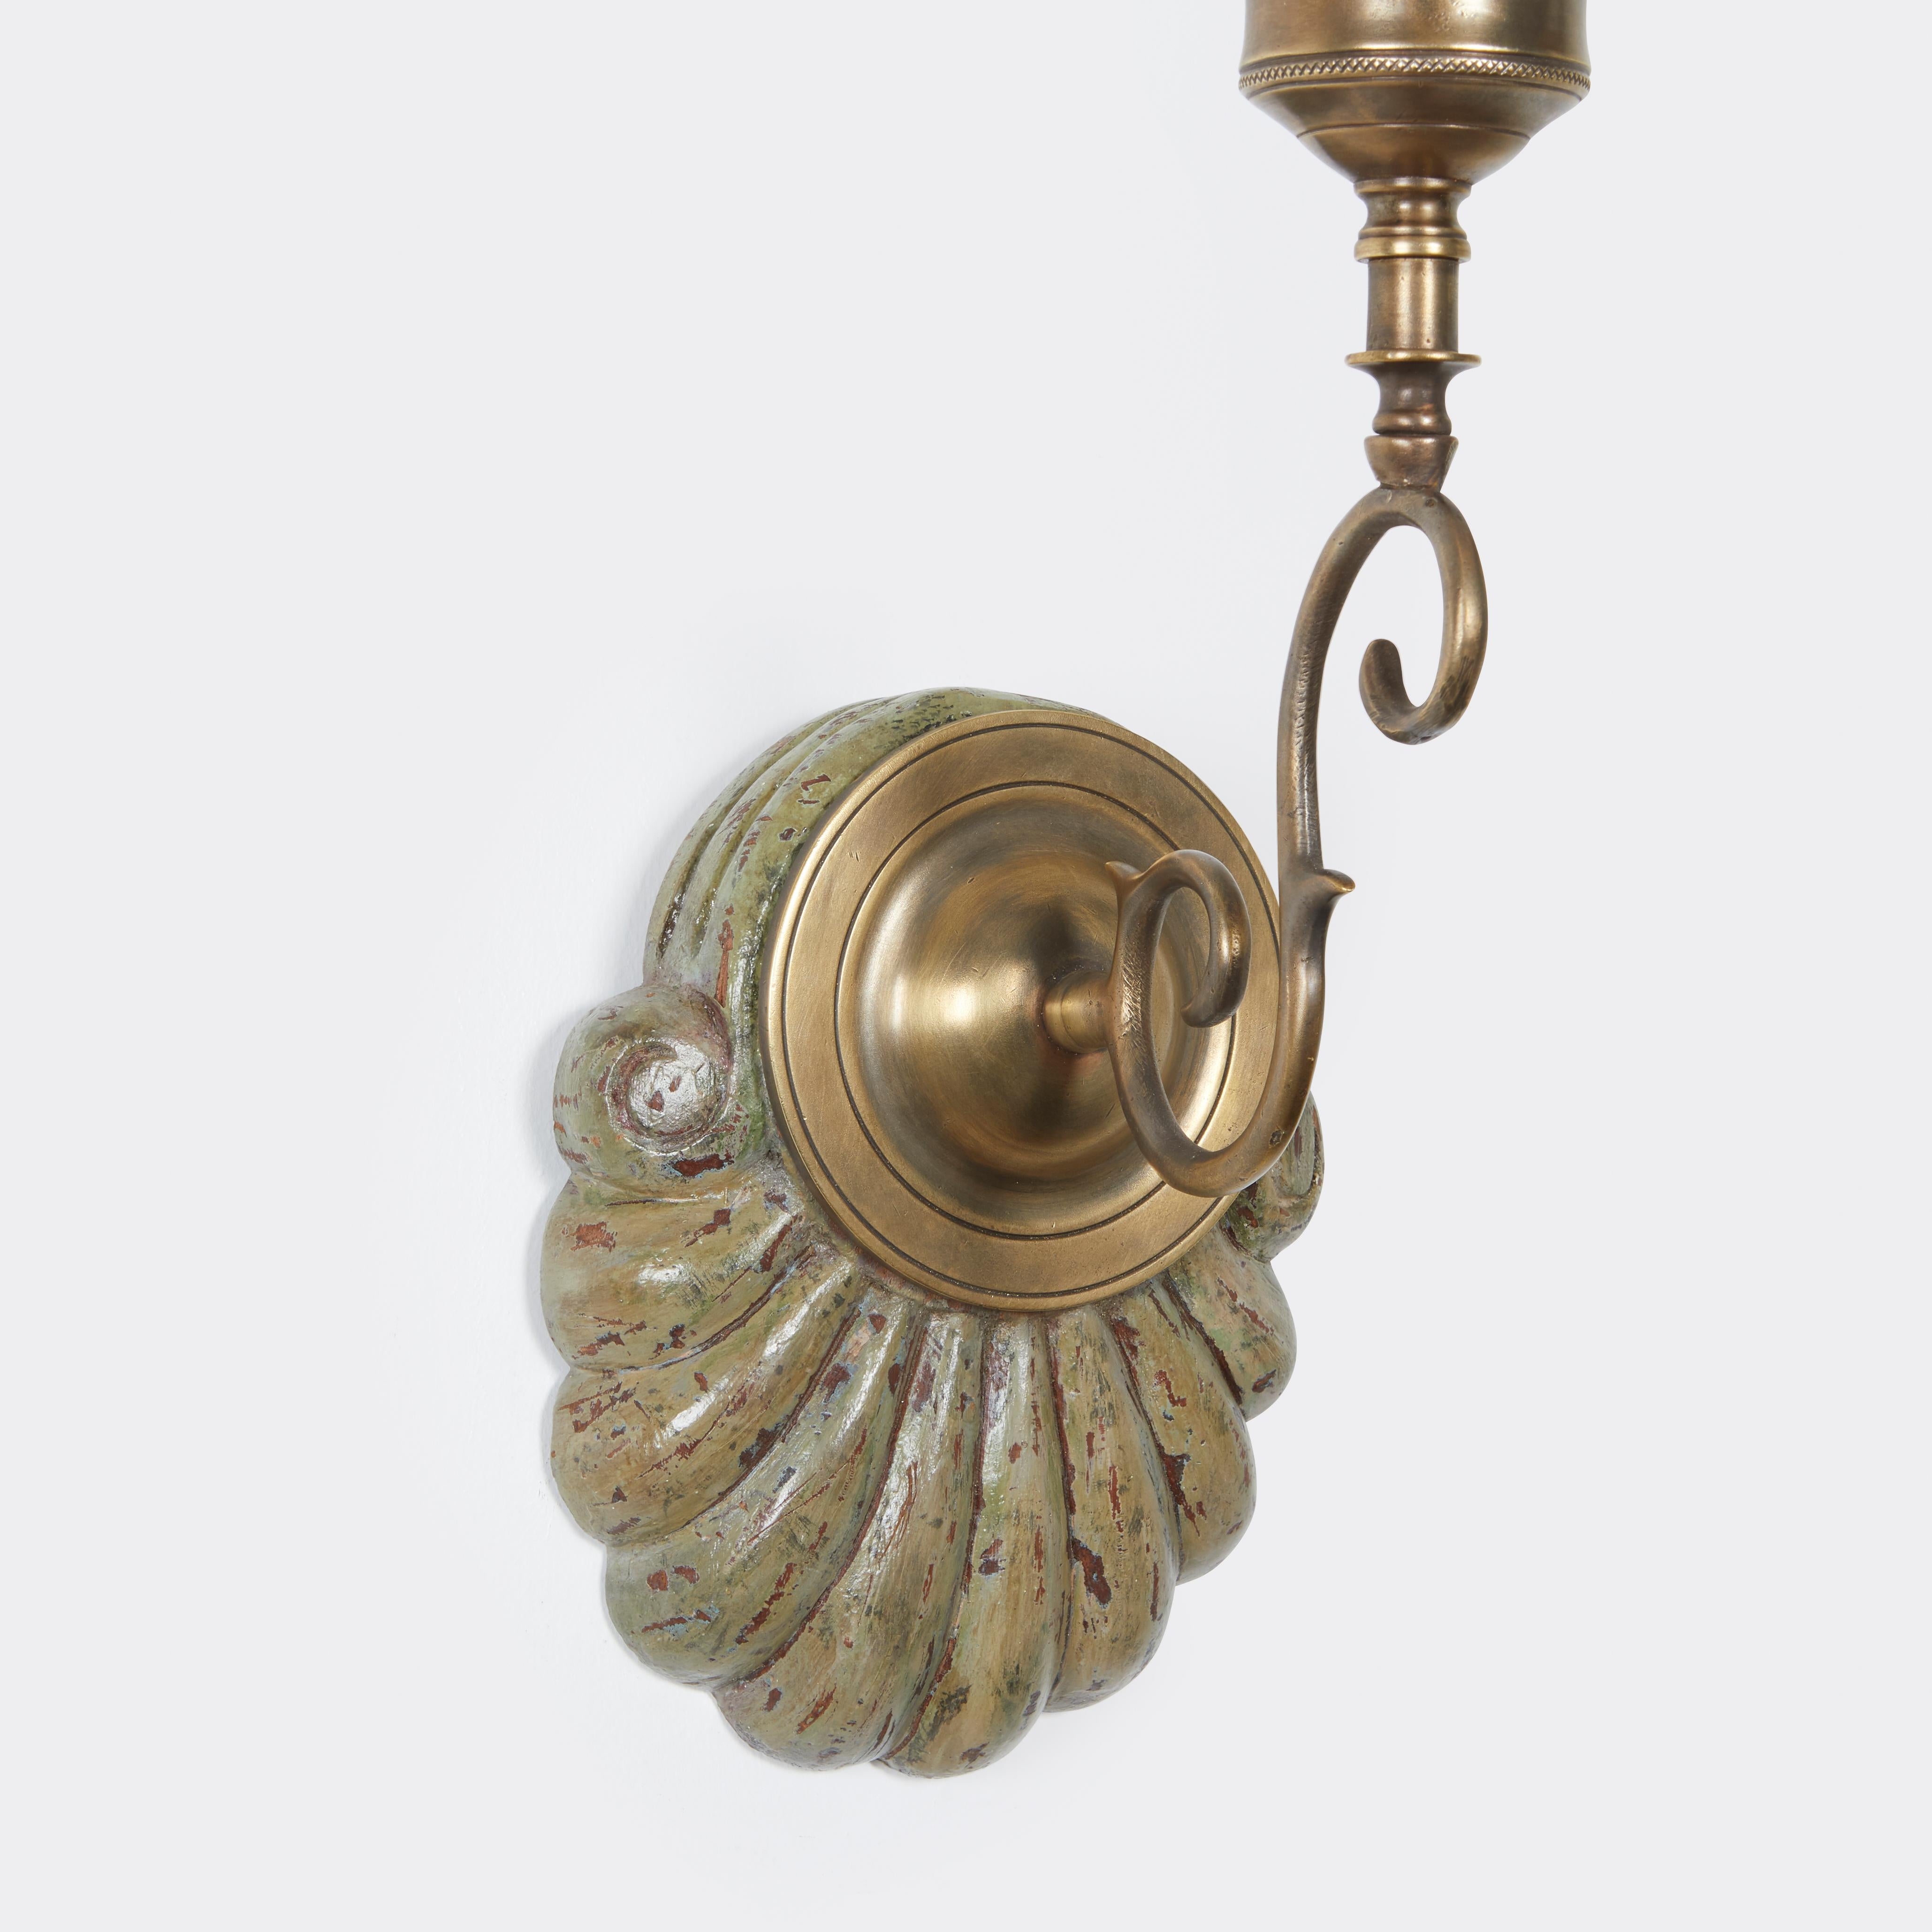 A pair of hand-carved mahogany shell form Georgian-style backplates with a green craquelure painted surface, brass sconce fittings and clear hurricane shades. Sconce is measured from bottom of backplate to top of shade height 23